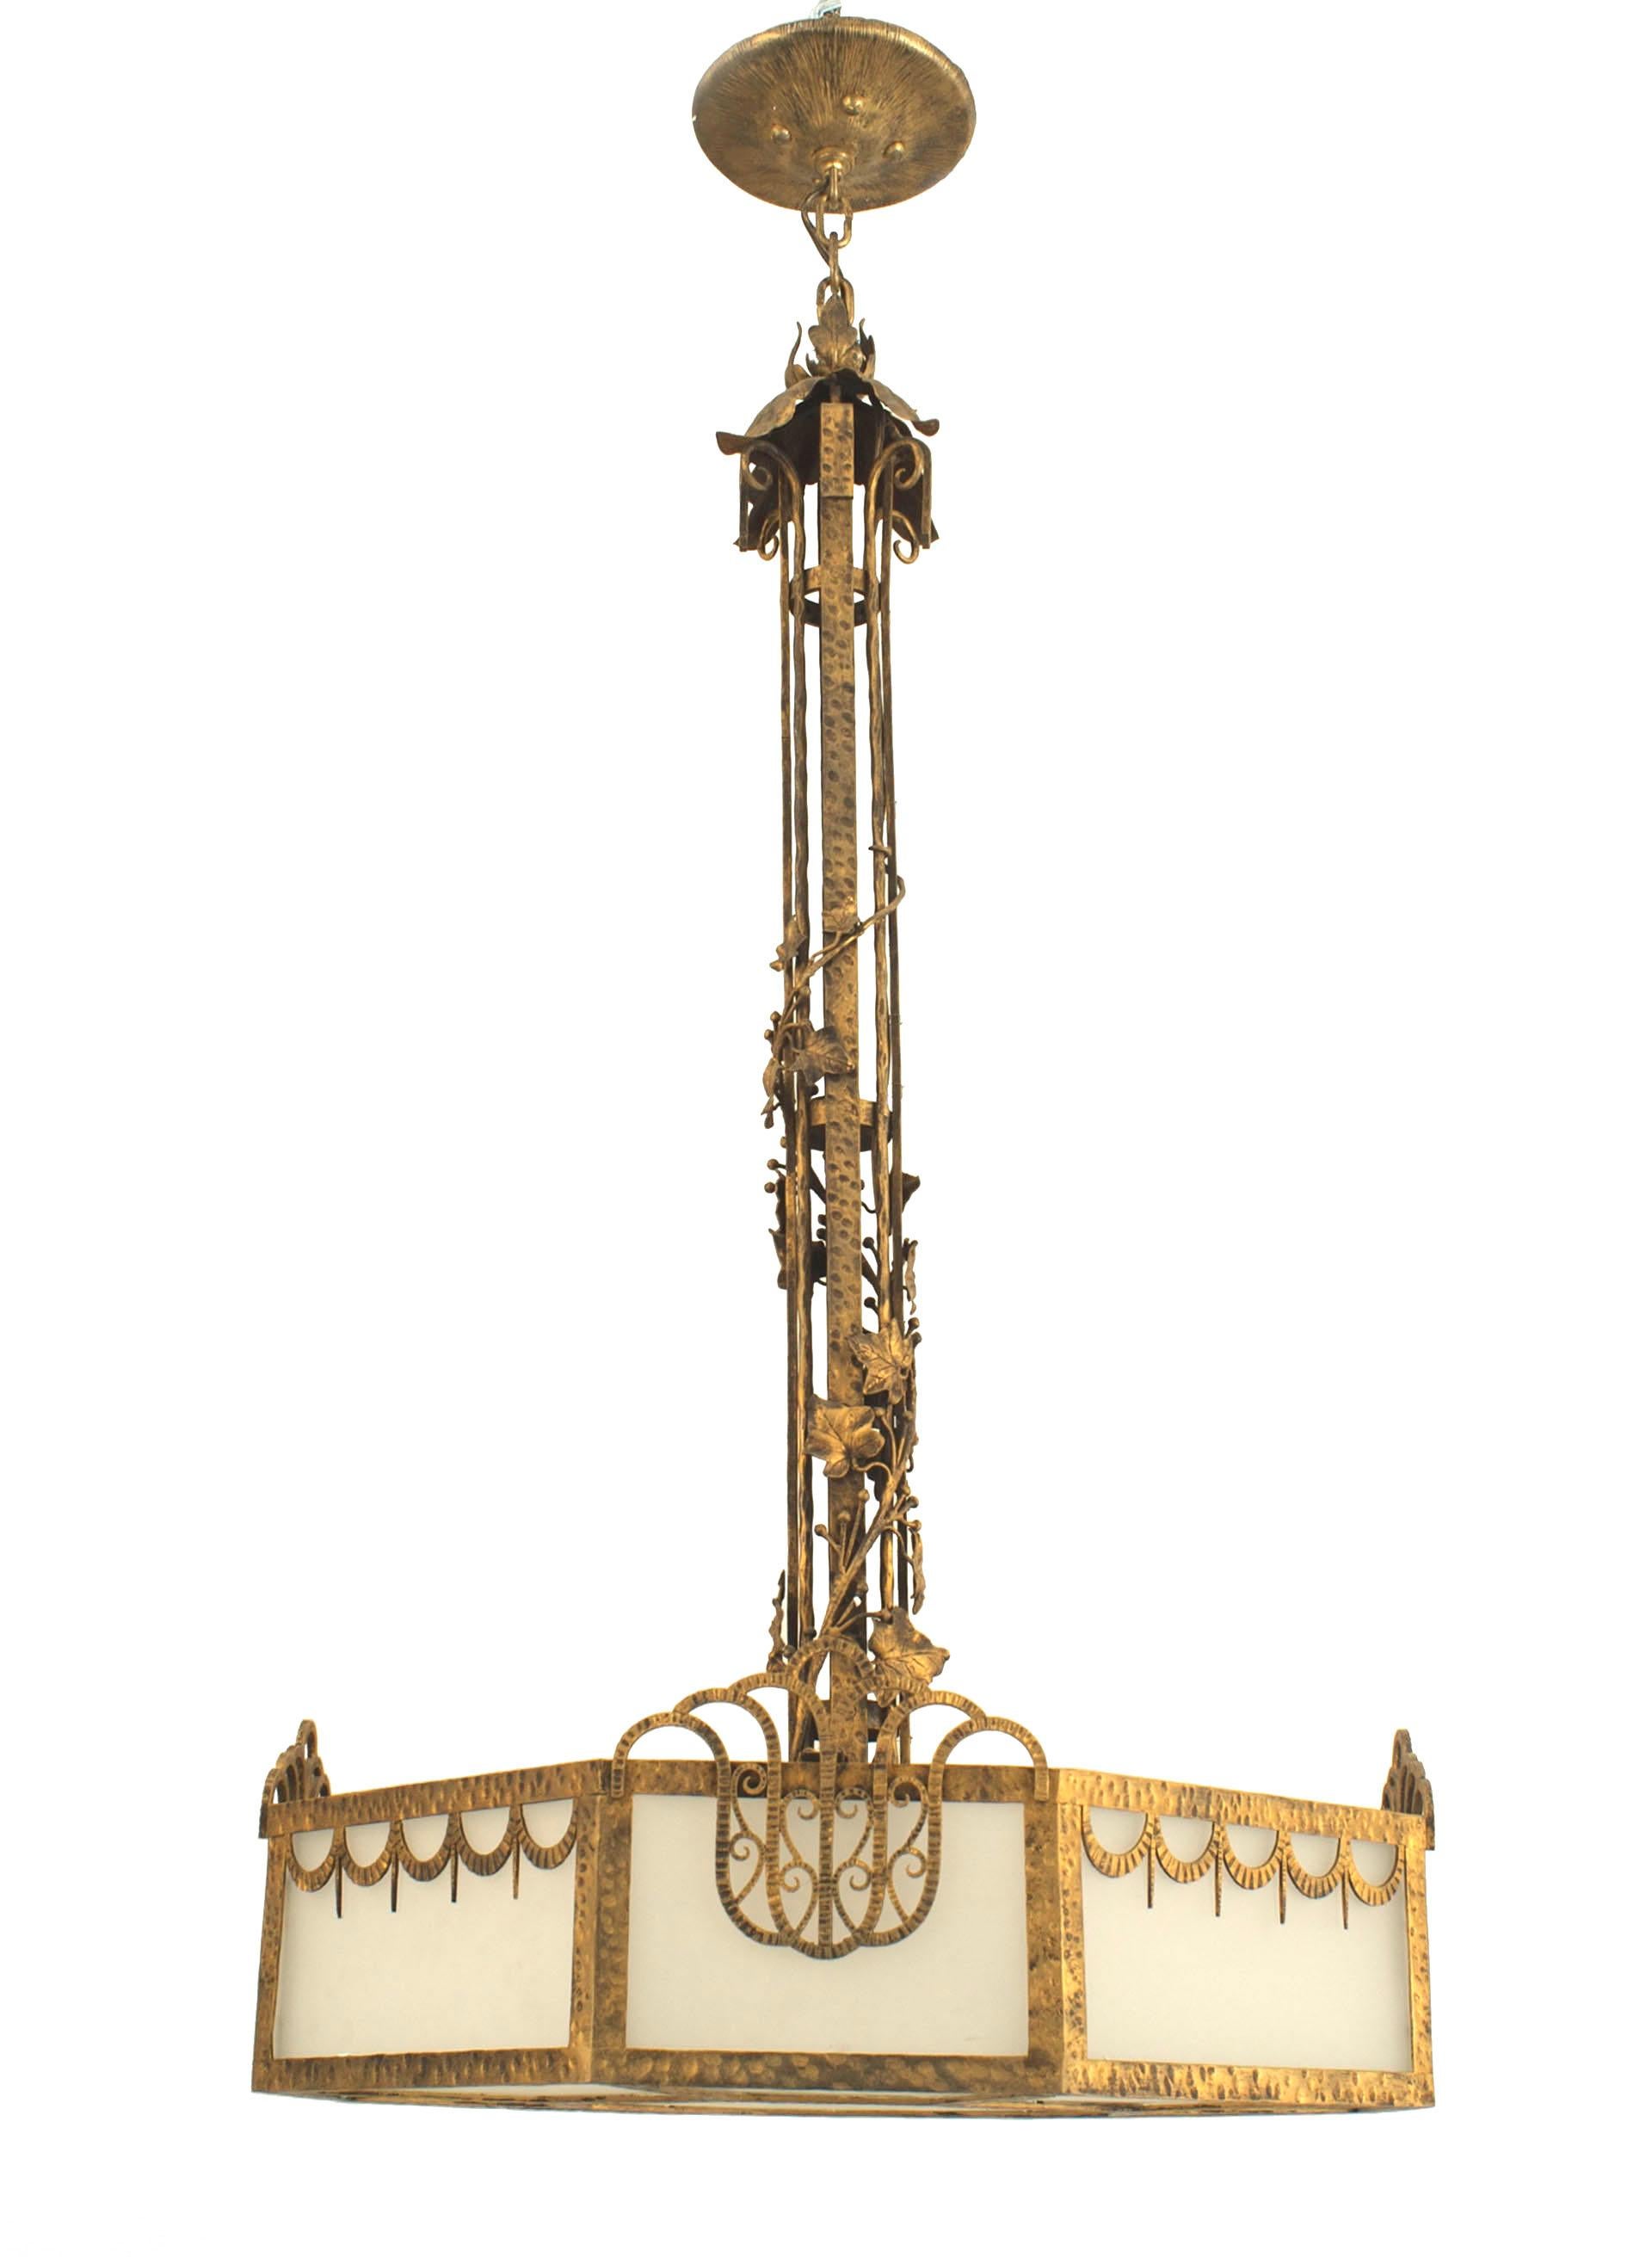 French Art Deco 8 sided chandelier with a hand-hammered and gilded iron frame having a swag and geometric design surrounding milk glass panels with a center shaft wrapped in ivy.
  